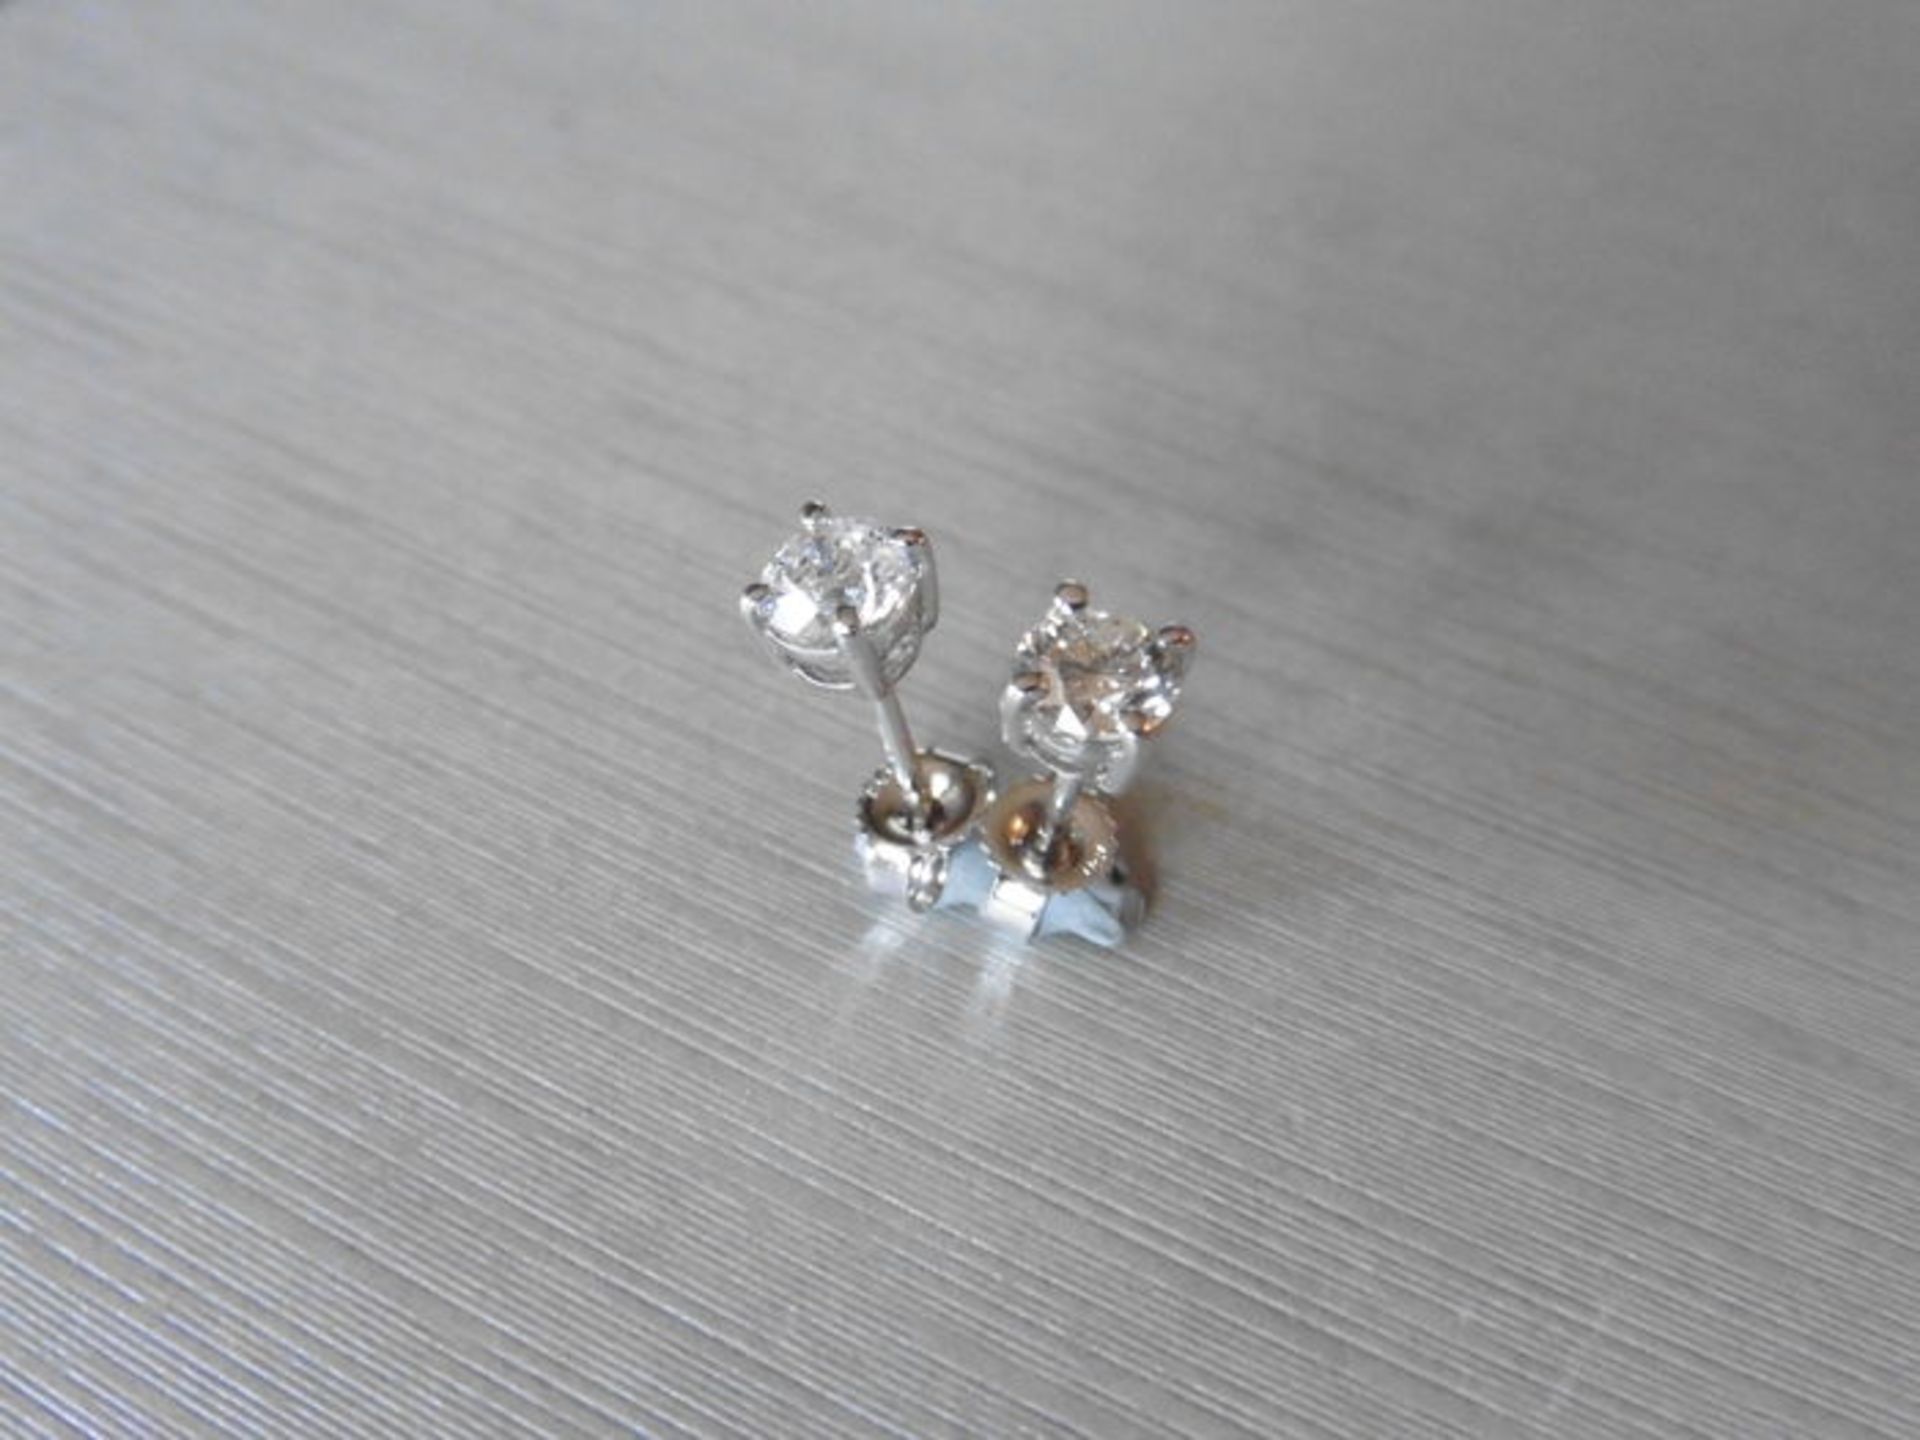 0.30ct Solitaire diamond stud earrings set with brilliant cut diamonds, SI2 clarity and I colour.